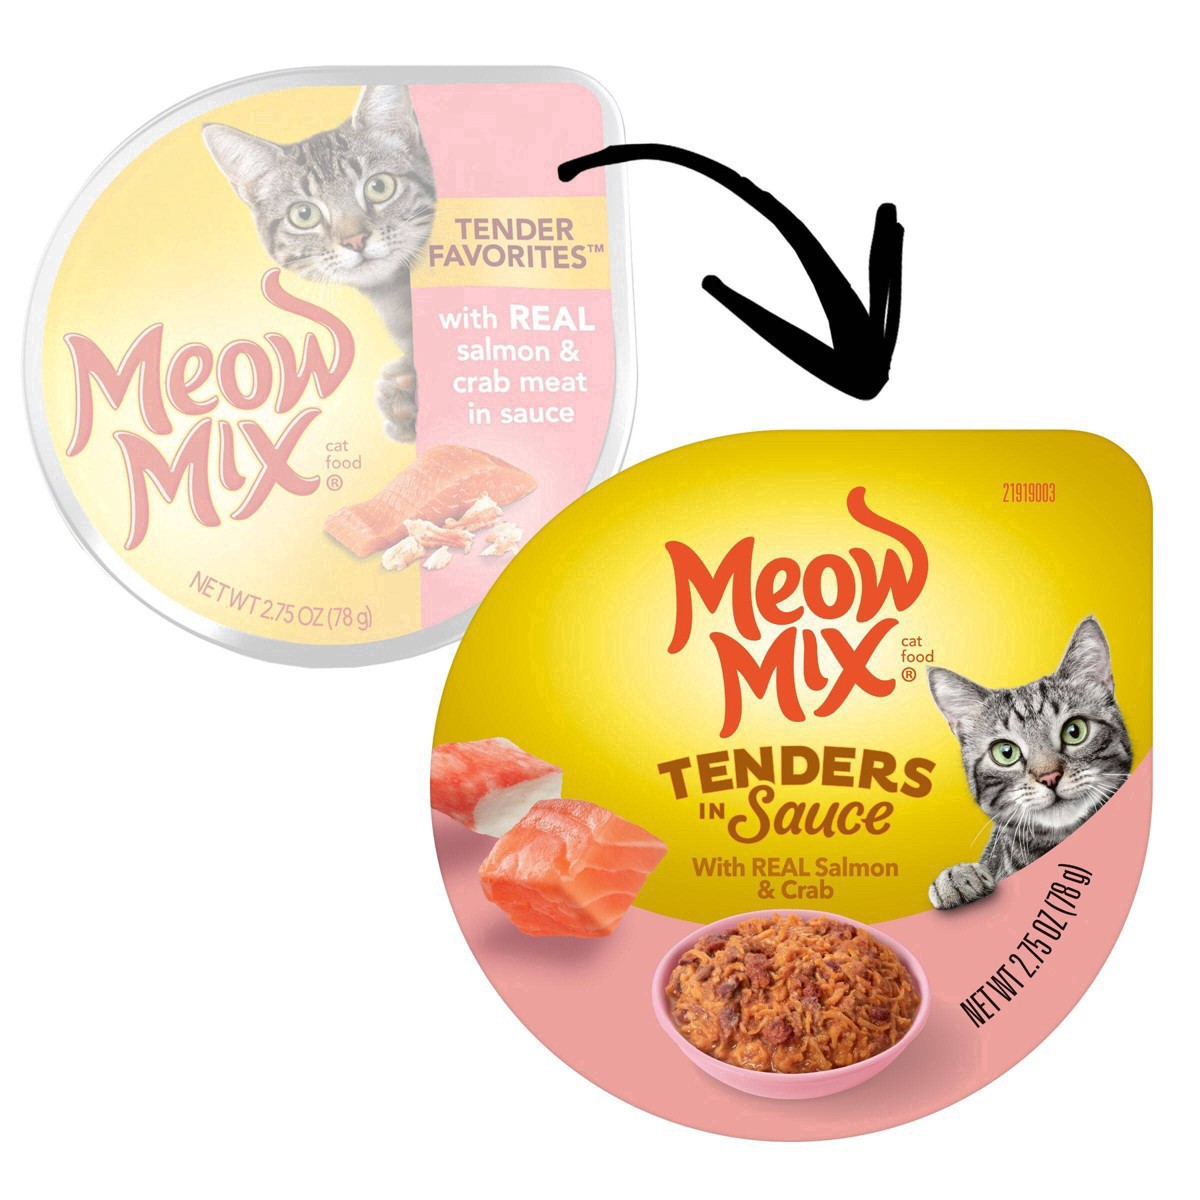 slide 18 of 64, Meow Mix Tenders in Sauce Wet Cat Food With REAL Salmon & Crab, 2.75 Oz. Cup (Packaging And Formulation Updates Underway), 2.75 oz